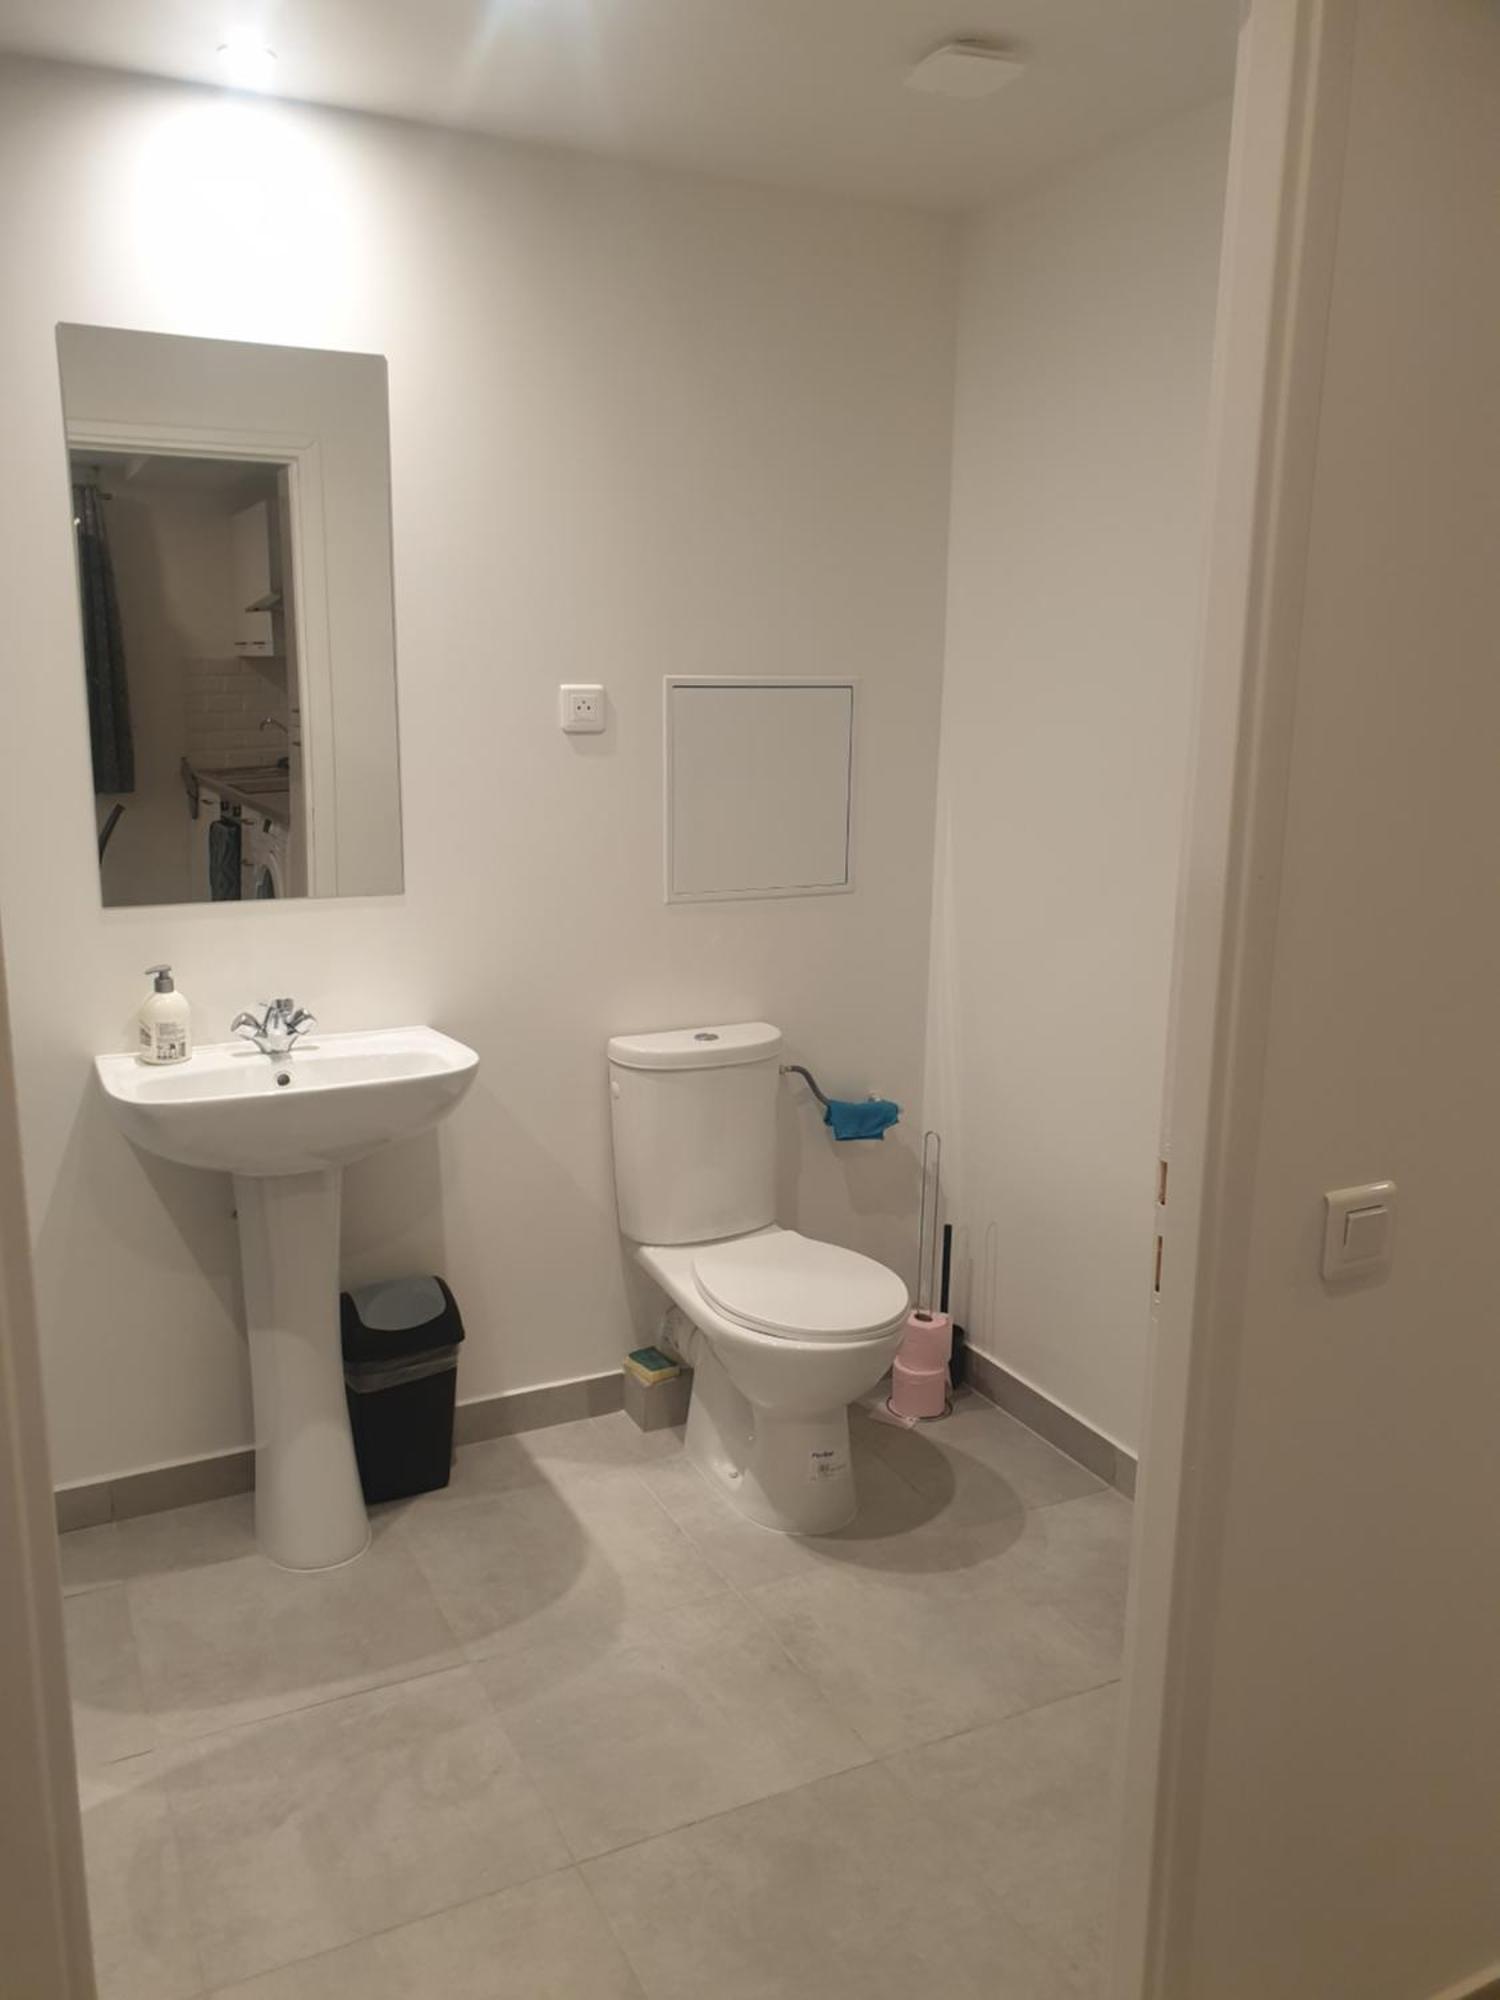 Appartements Renove 2023 Proche Aeroport 5Min, Gare Sncf 2 Min, Tramway Au Pied De L'Immeuble , Parking Possible, Renovated Apartments 2023 Near The Airport 5 Min, Train Station 2 Min, Tram Next To The Building 1 Min, Parking Possible 尼斯 客房 照片